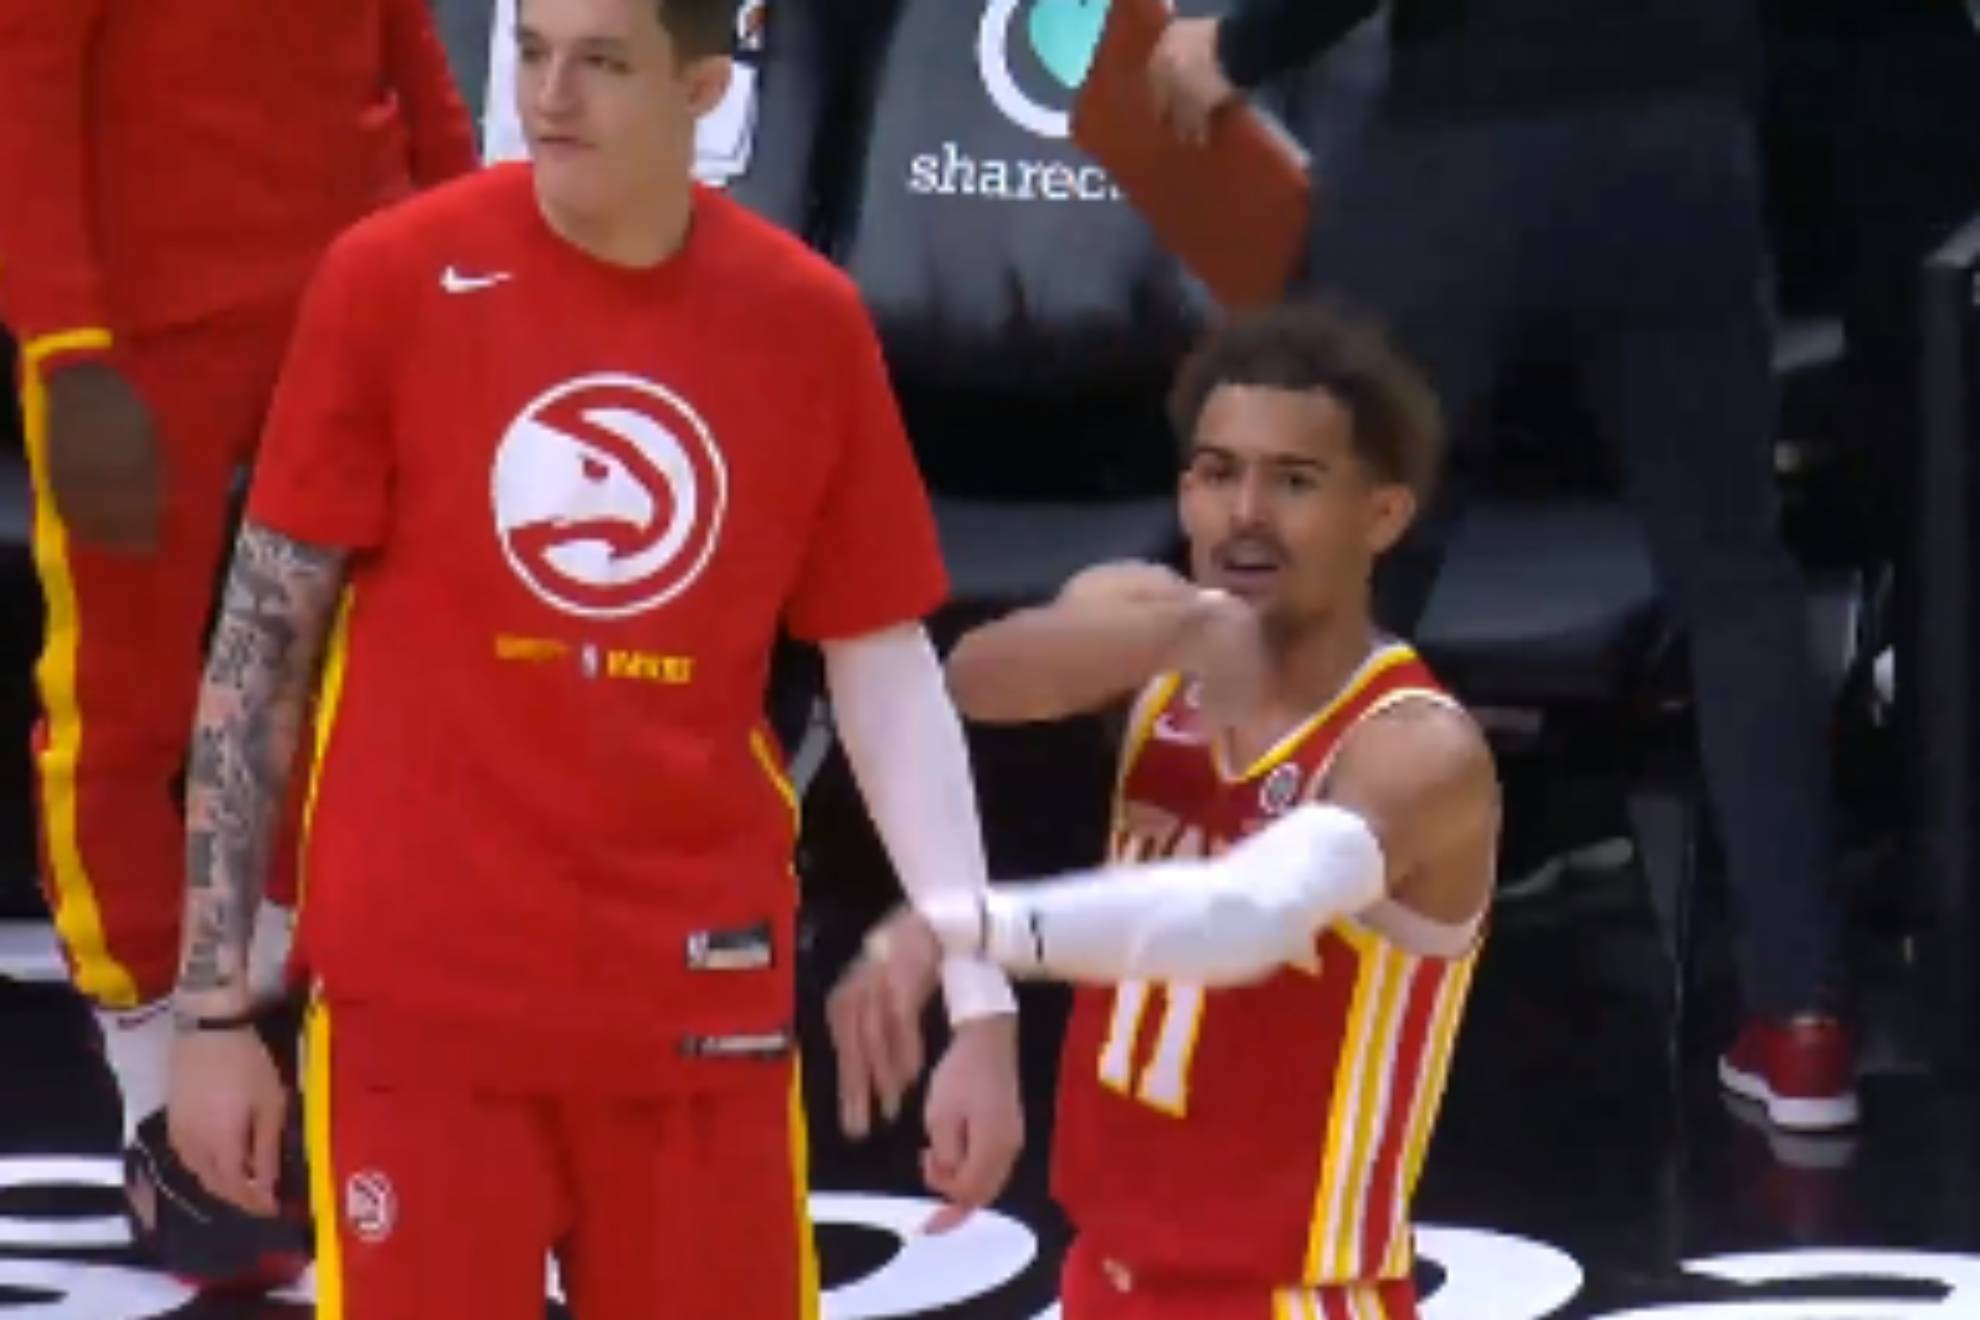 Trae Young is ejected for throwing the ball at a referee